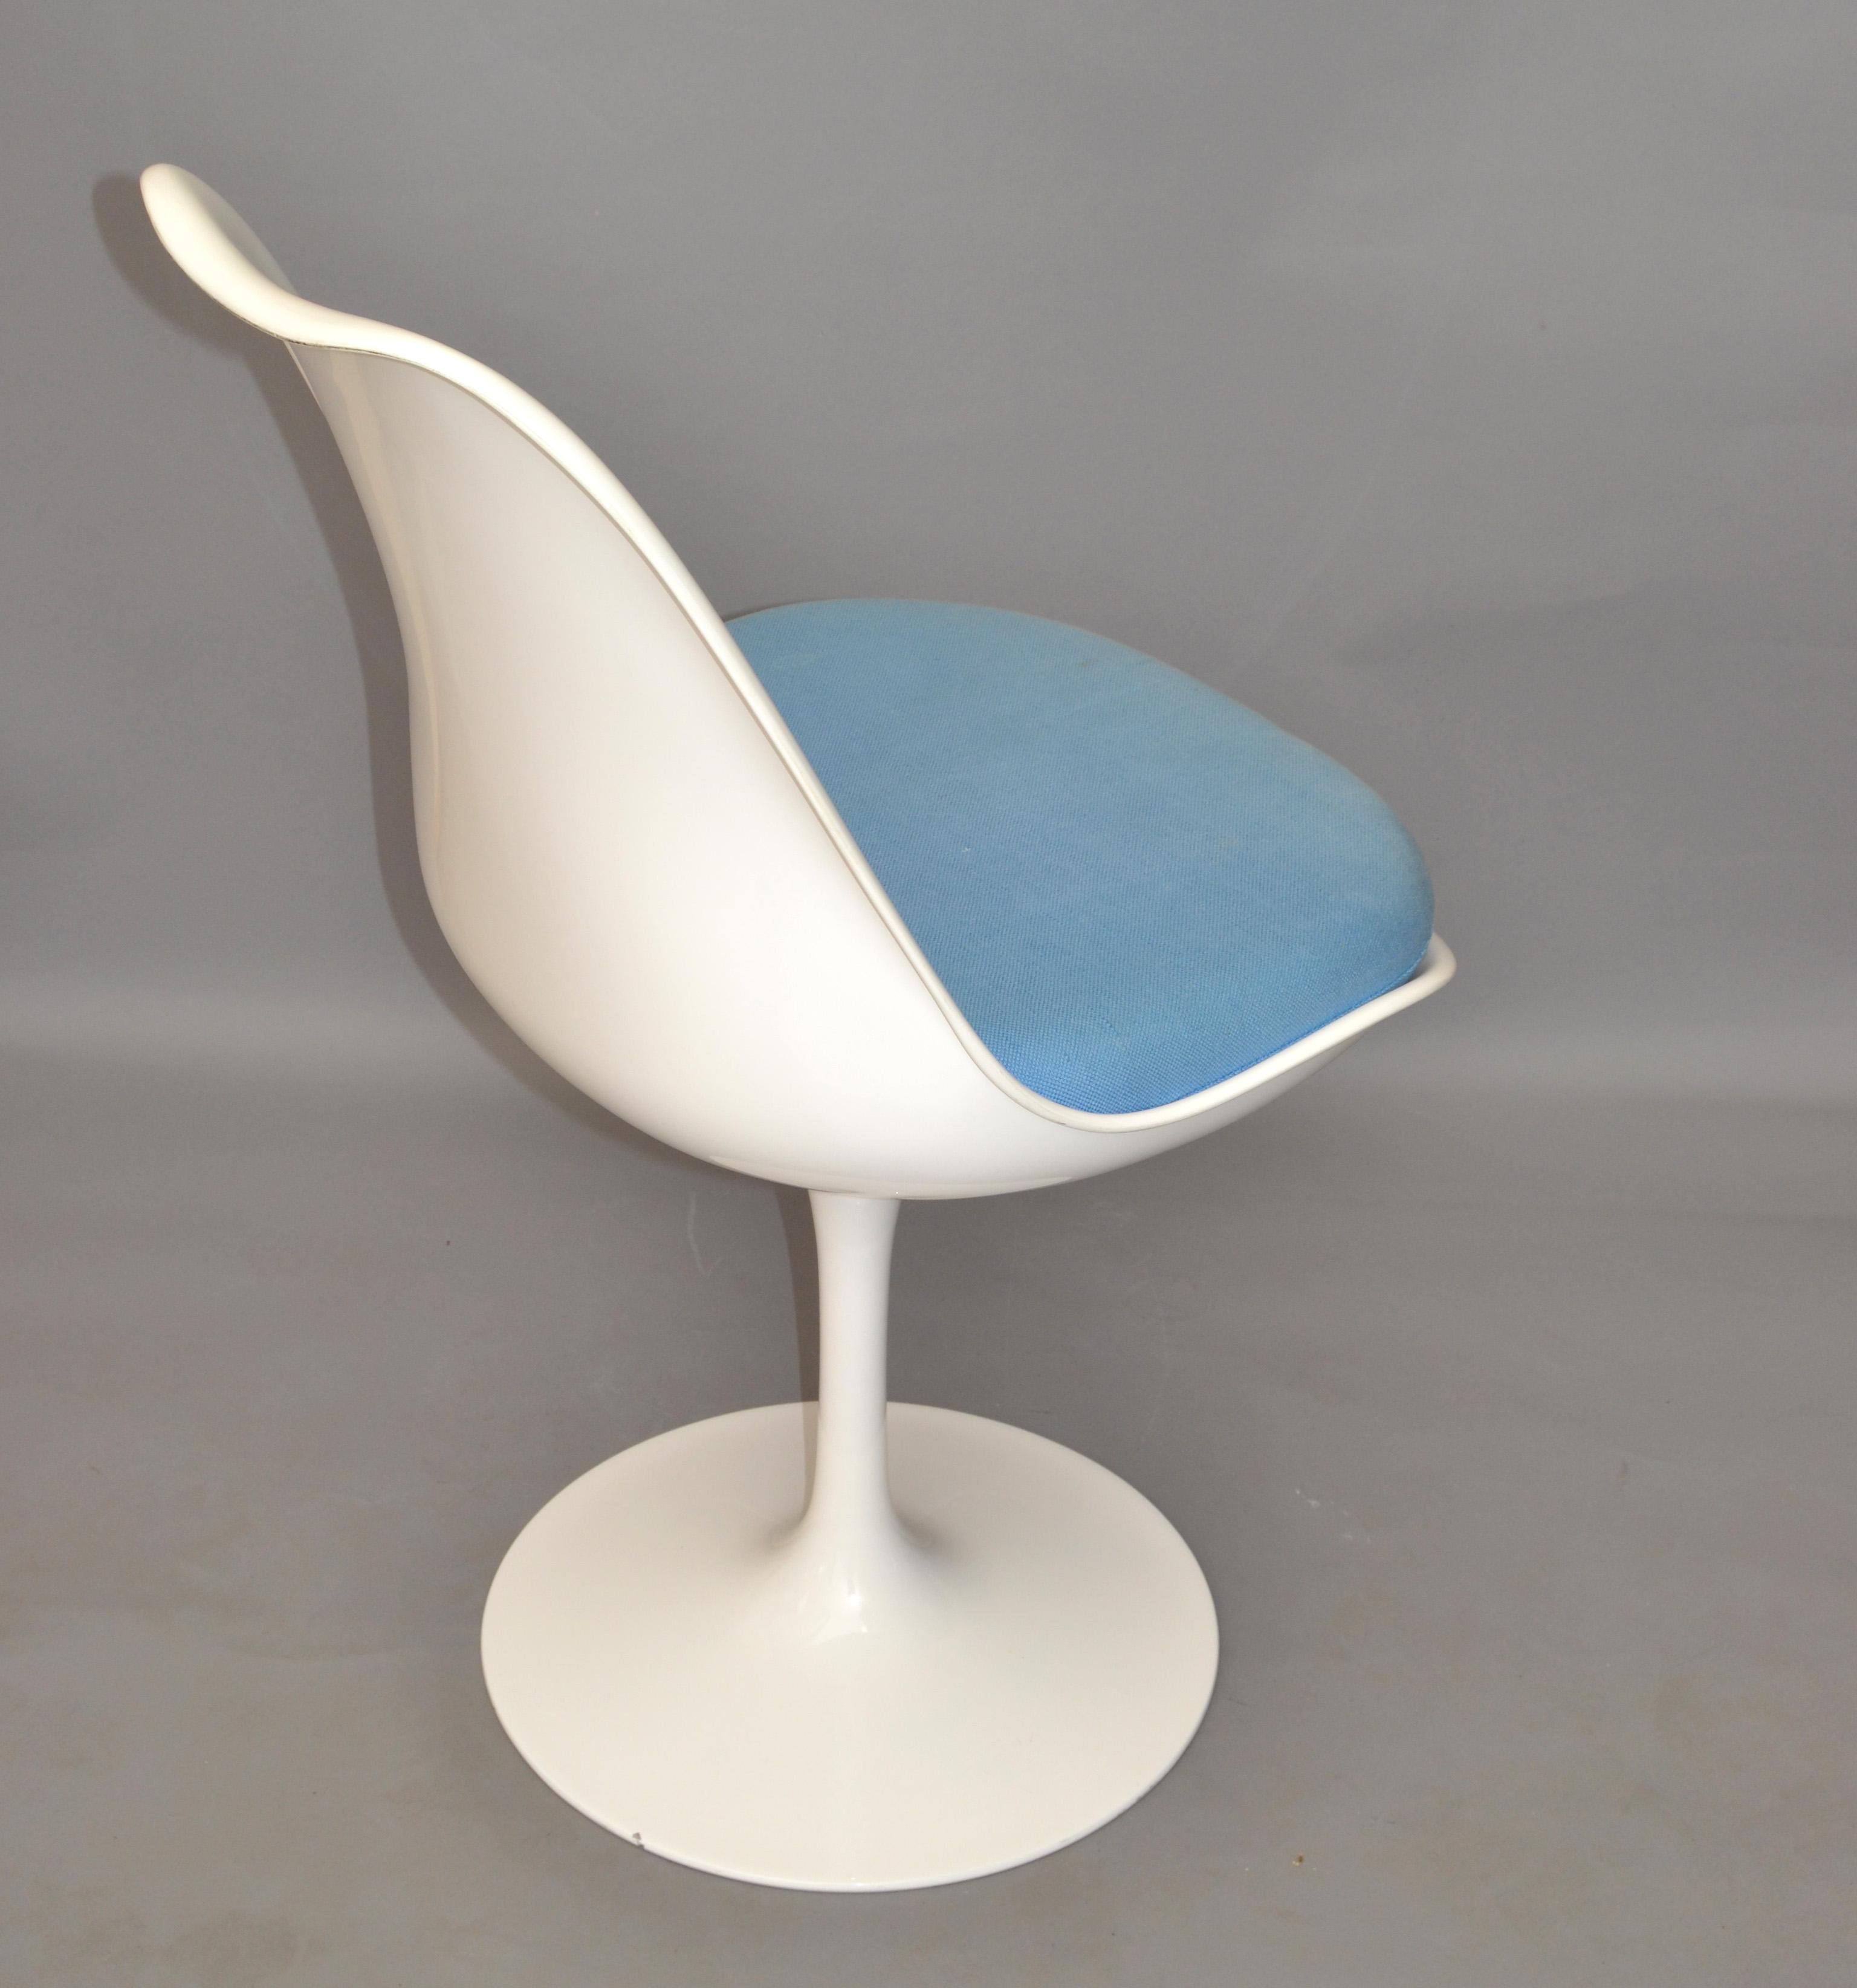 Fabric Tulip Swivel Chair in the Style of Knoll Attributed to Eero Saarinen White Blue